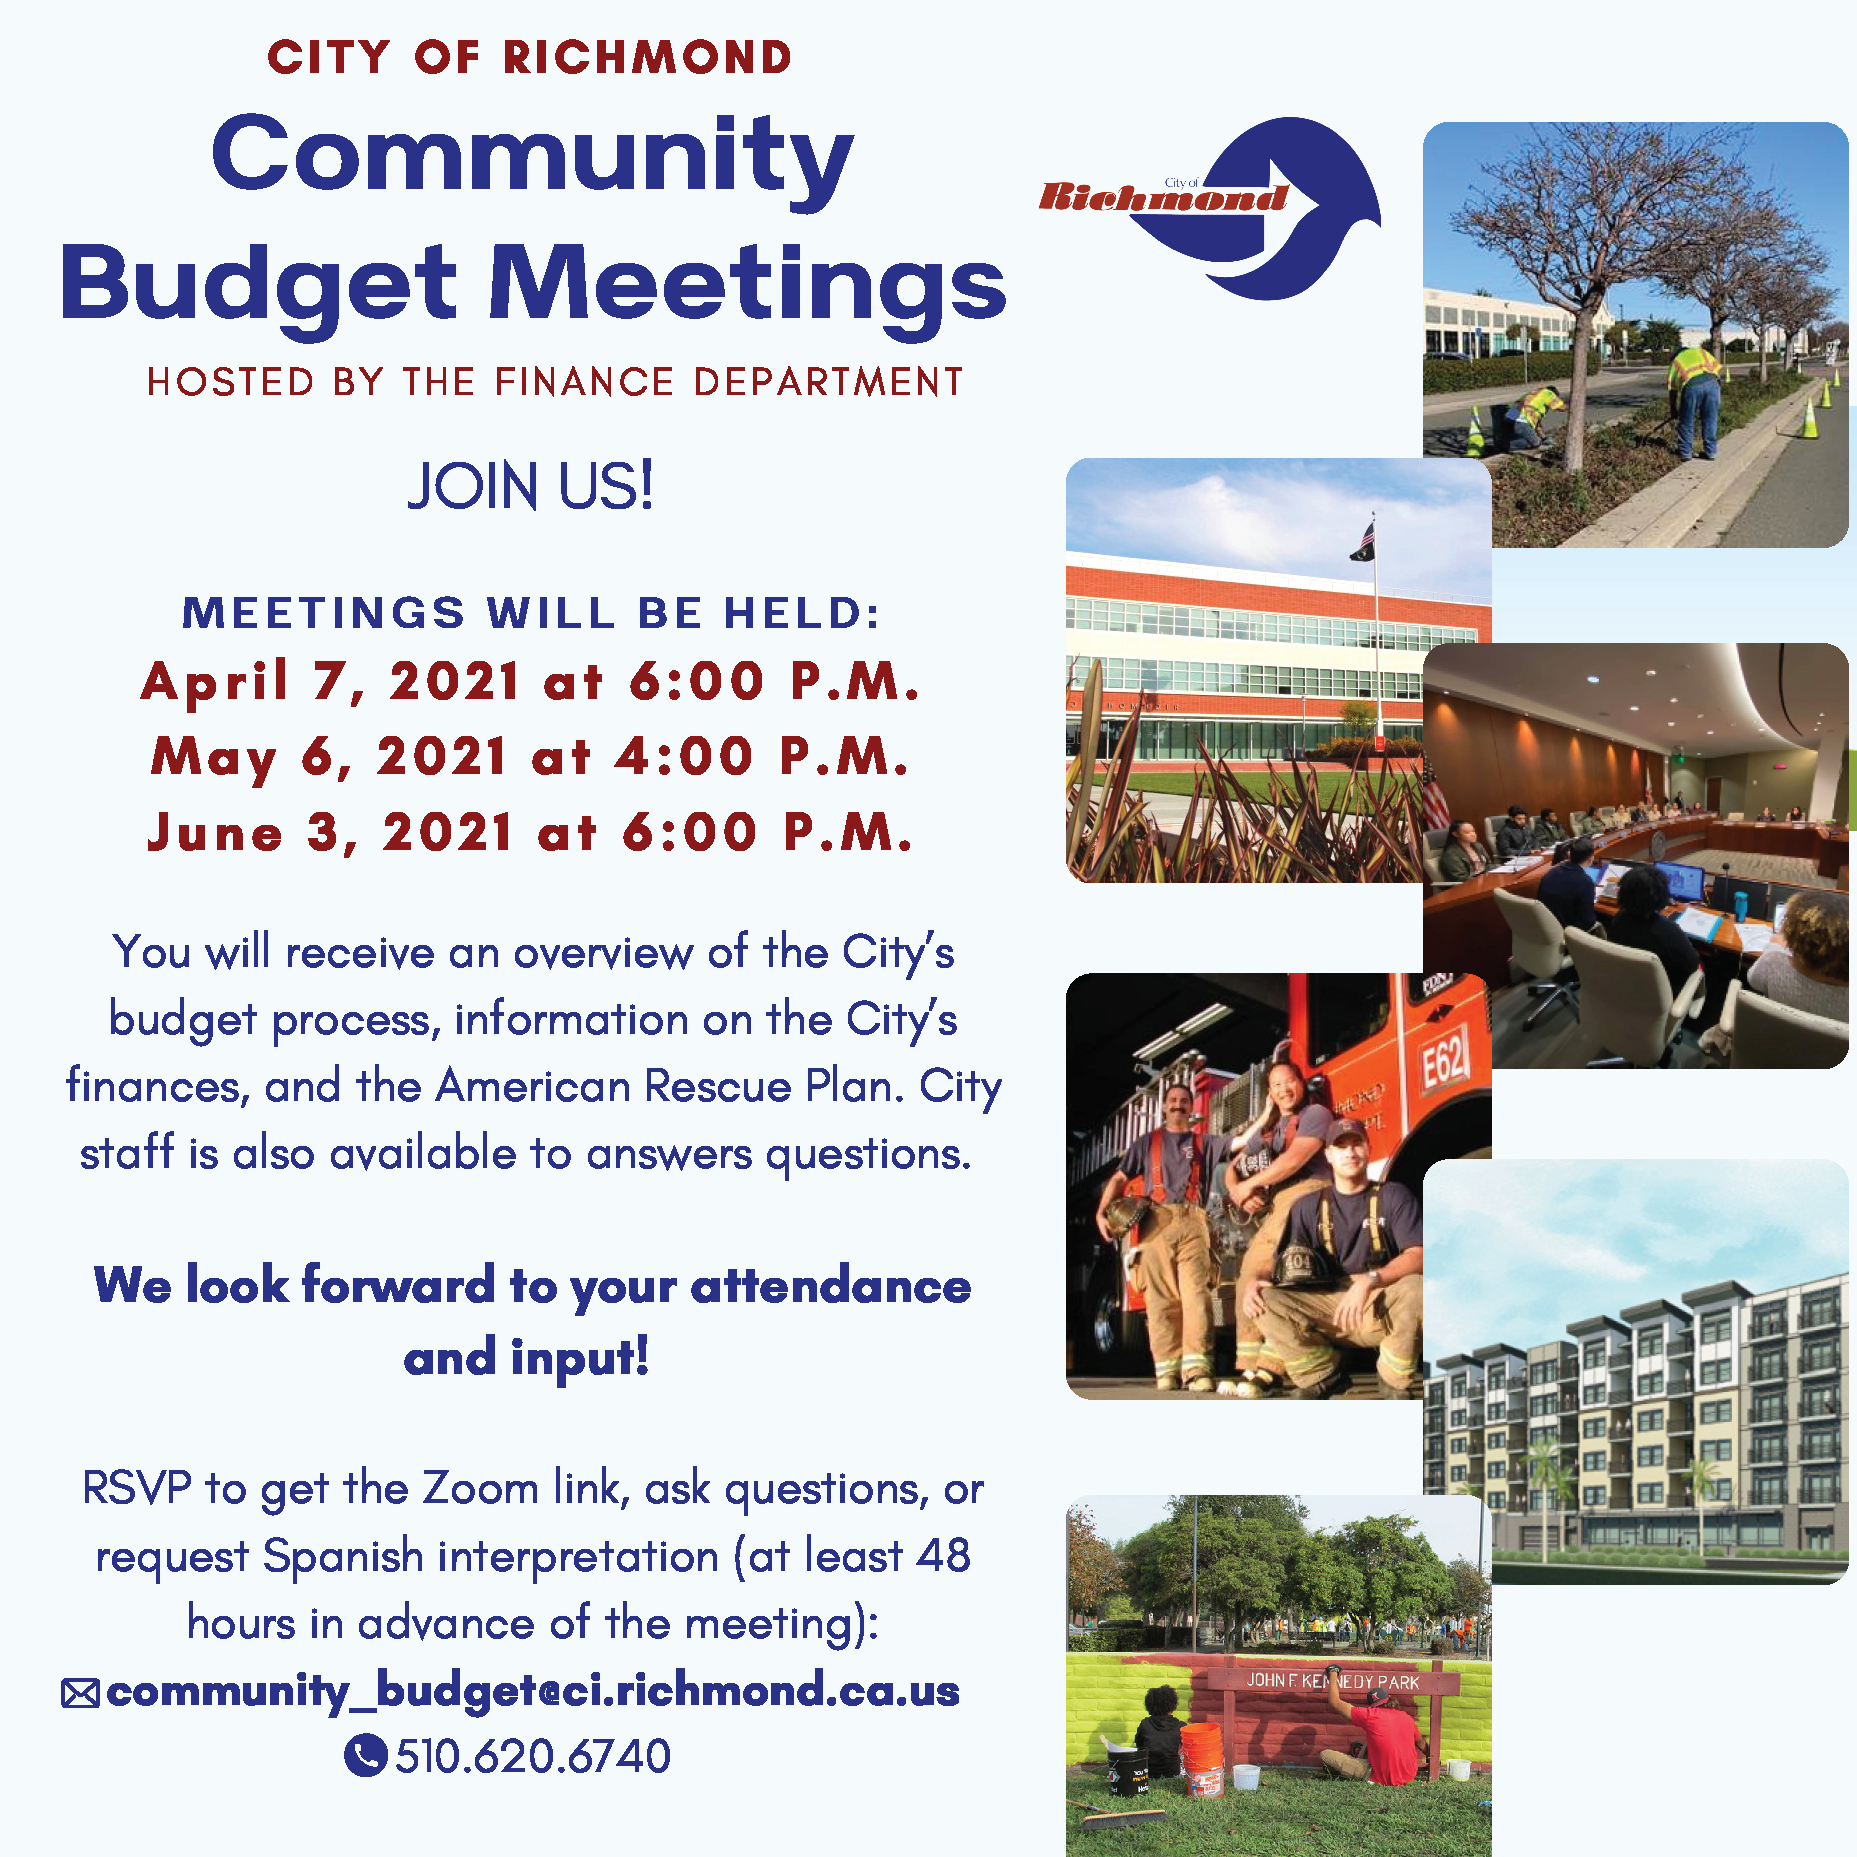 City of Richmond Community Budget Meeting - April 7th at 6:00pm